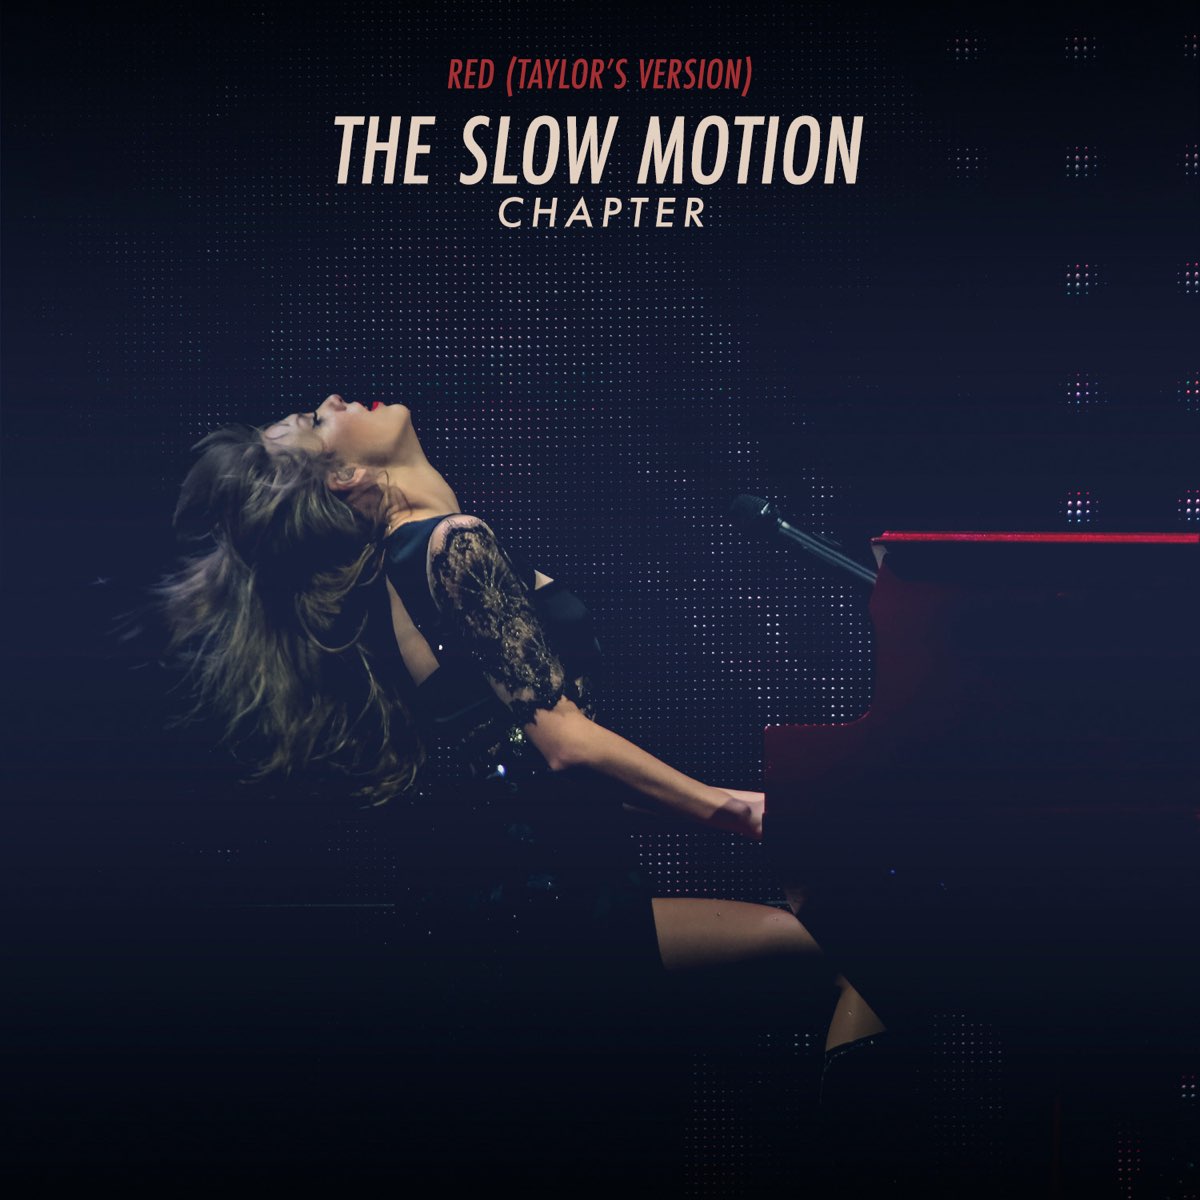 Red Taylors Version The Slow Motion Chapter By Taylor Swift On Apple Music